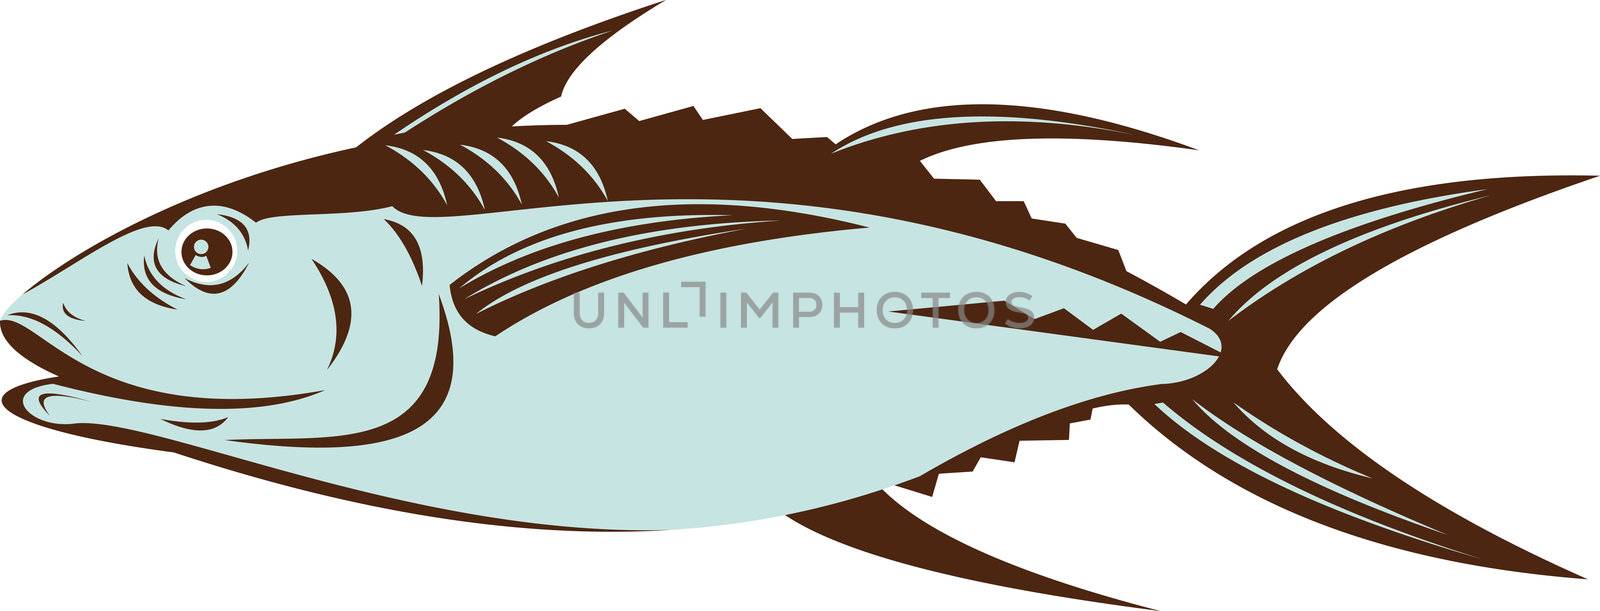 illustration of an albacore tuna viewed from side done in retro style